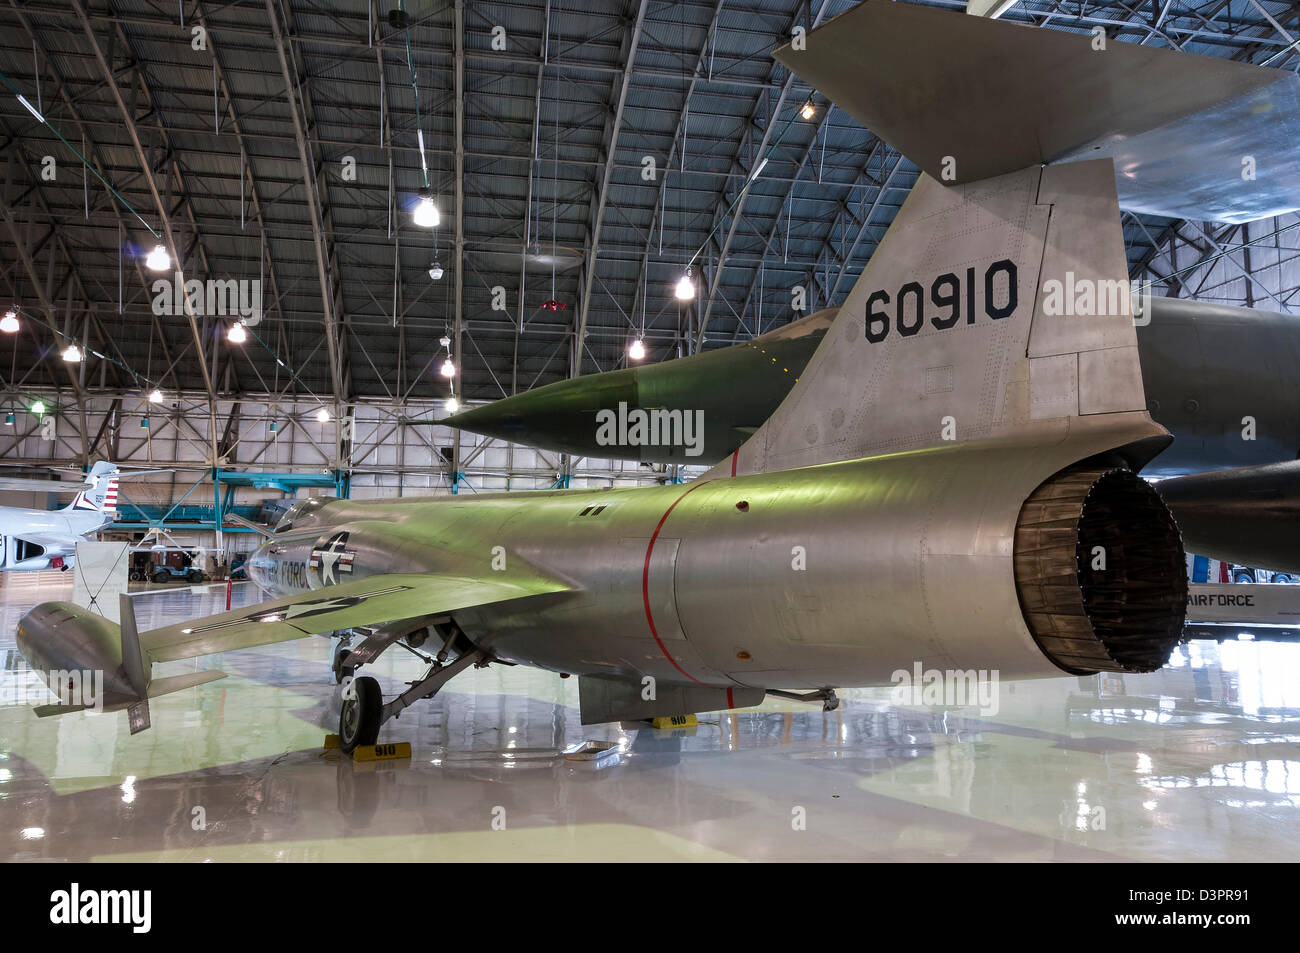 Lockheed F-104 Starfighter, Wings over the Rockies Air and Space Museum, Denver, Colorado. Stock Photo